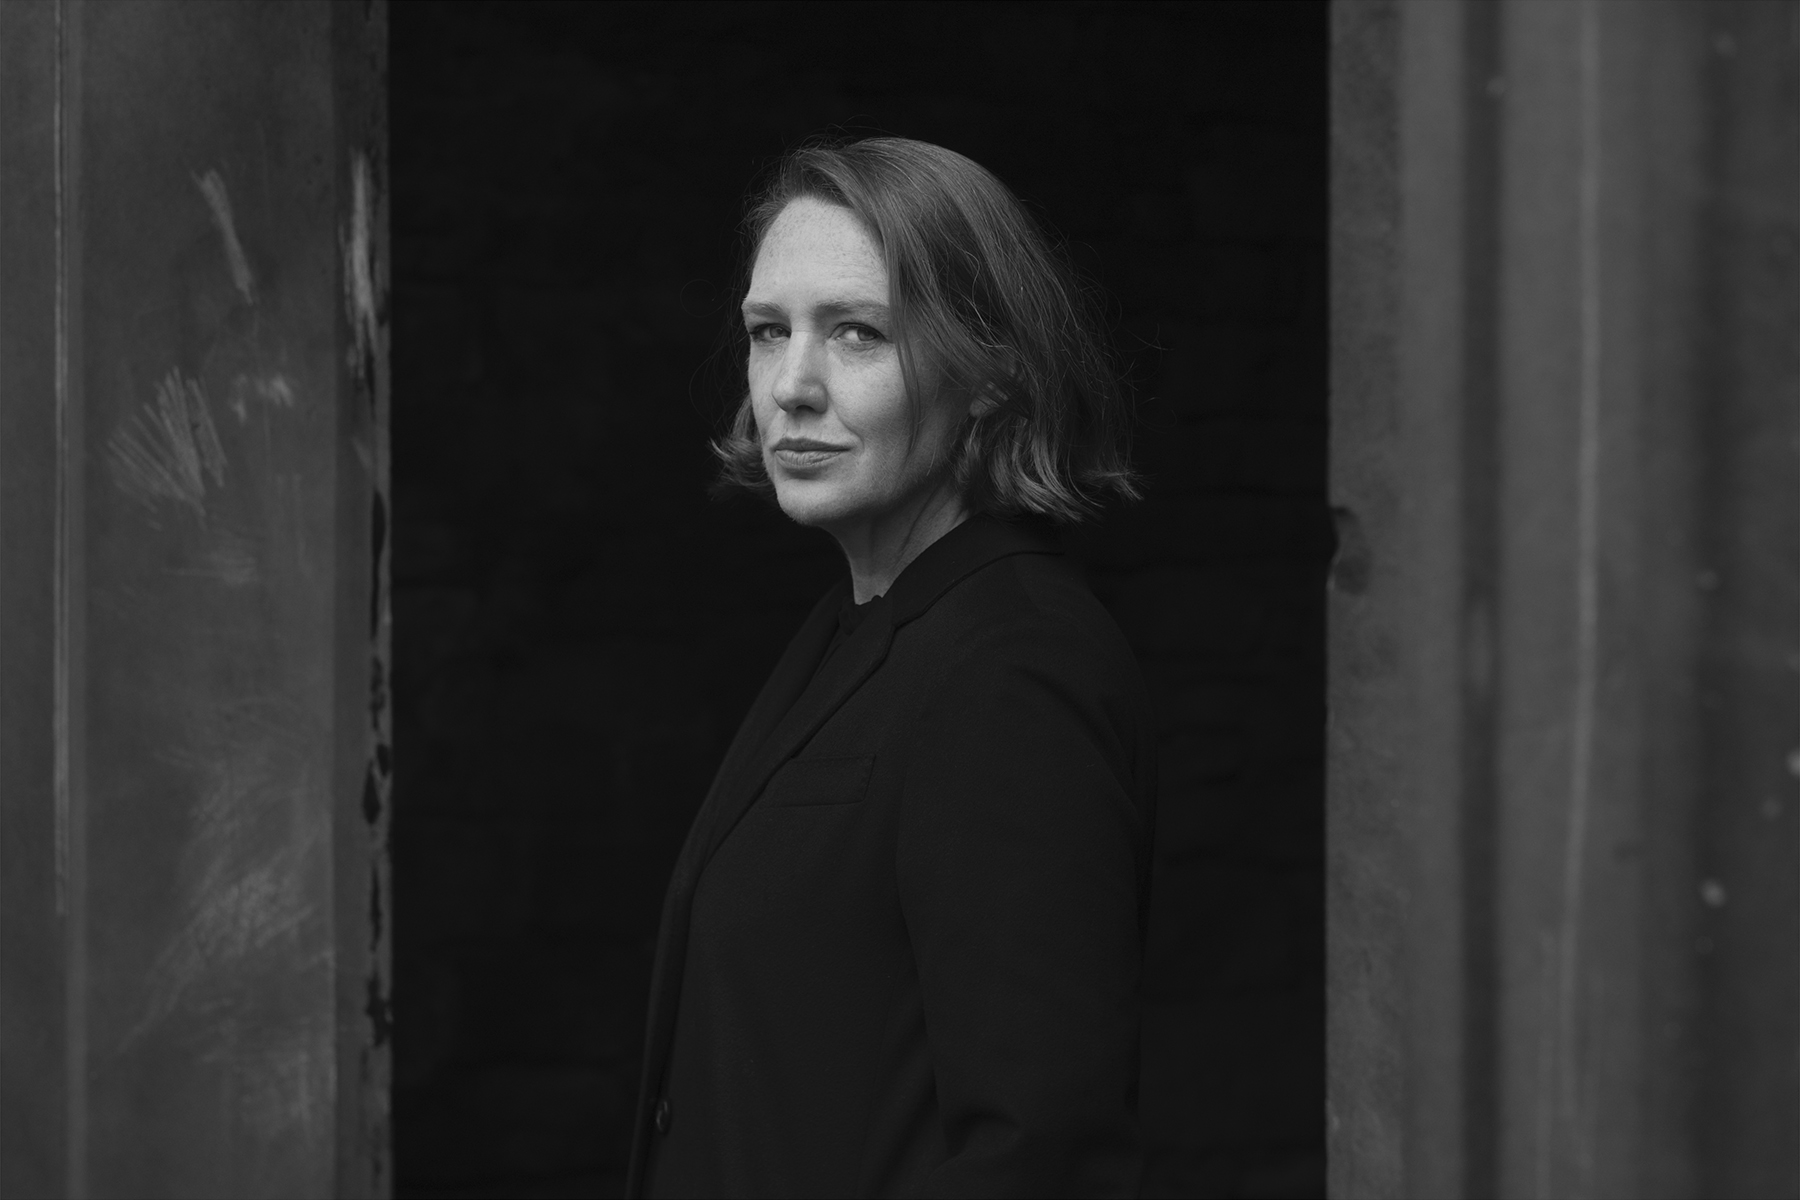 A black and white photo of Paula Hawkins' head and shoulders, as she looks directly towards the viewer.